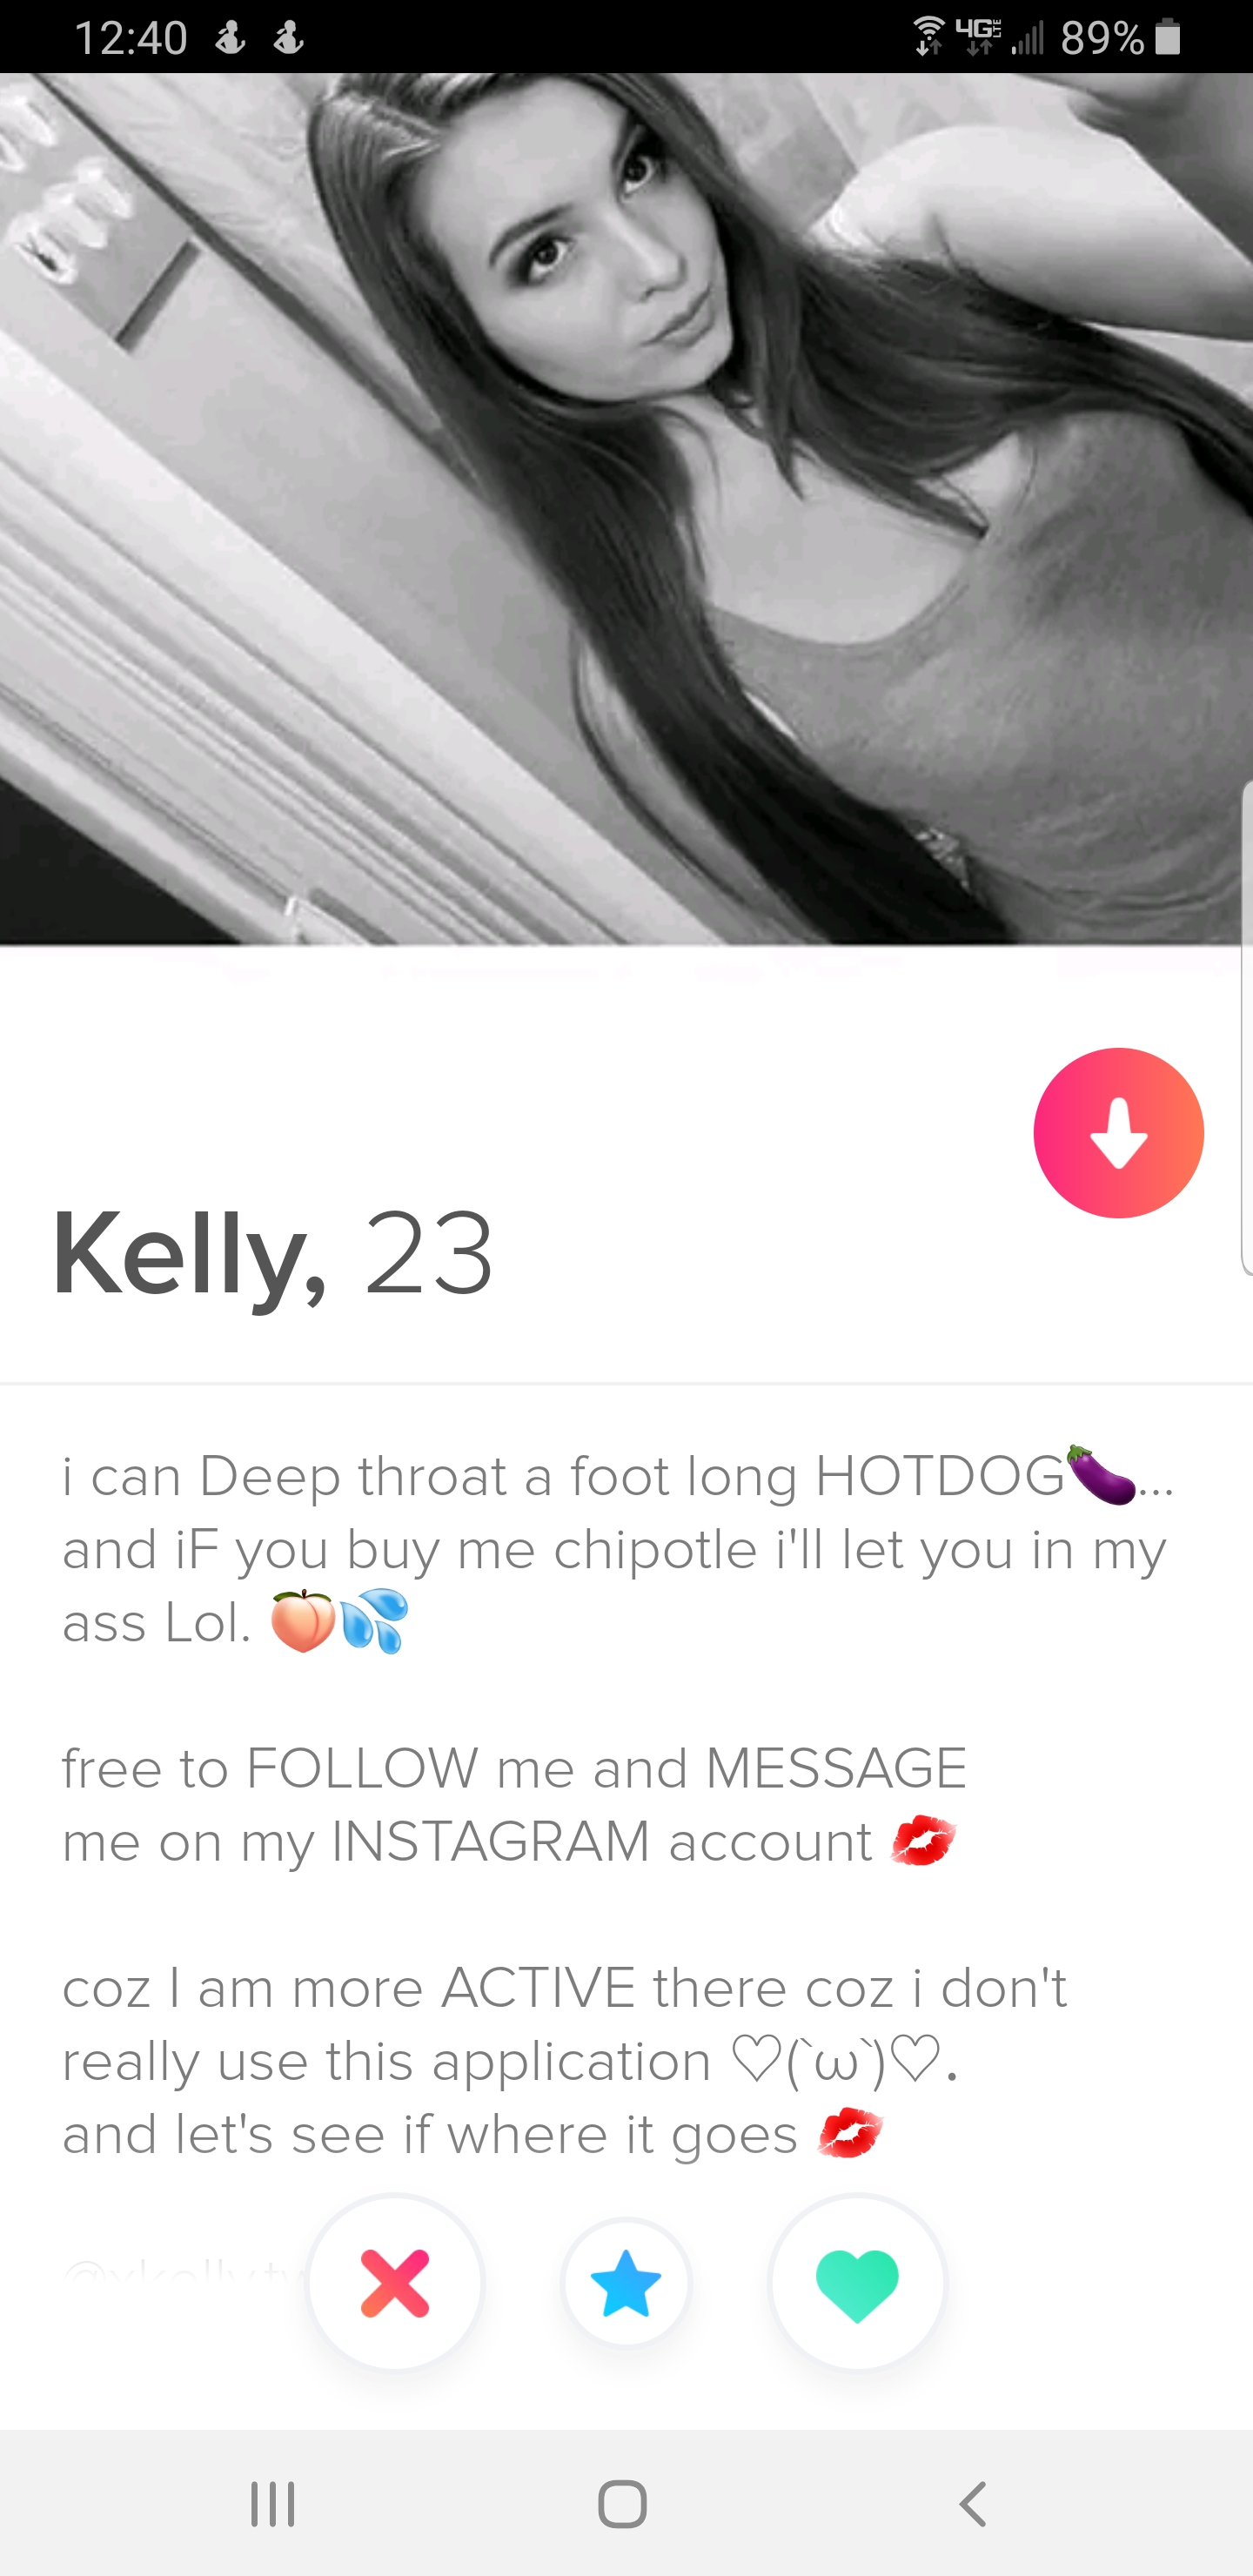 tinder wins and fails -can Deep throat a foot long Hotdogs and if you buy me chipotle I'll let you in my ass Lol free to me and Message me on my Instagram account coz I am more Active there coz i don't really use this application